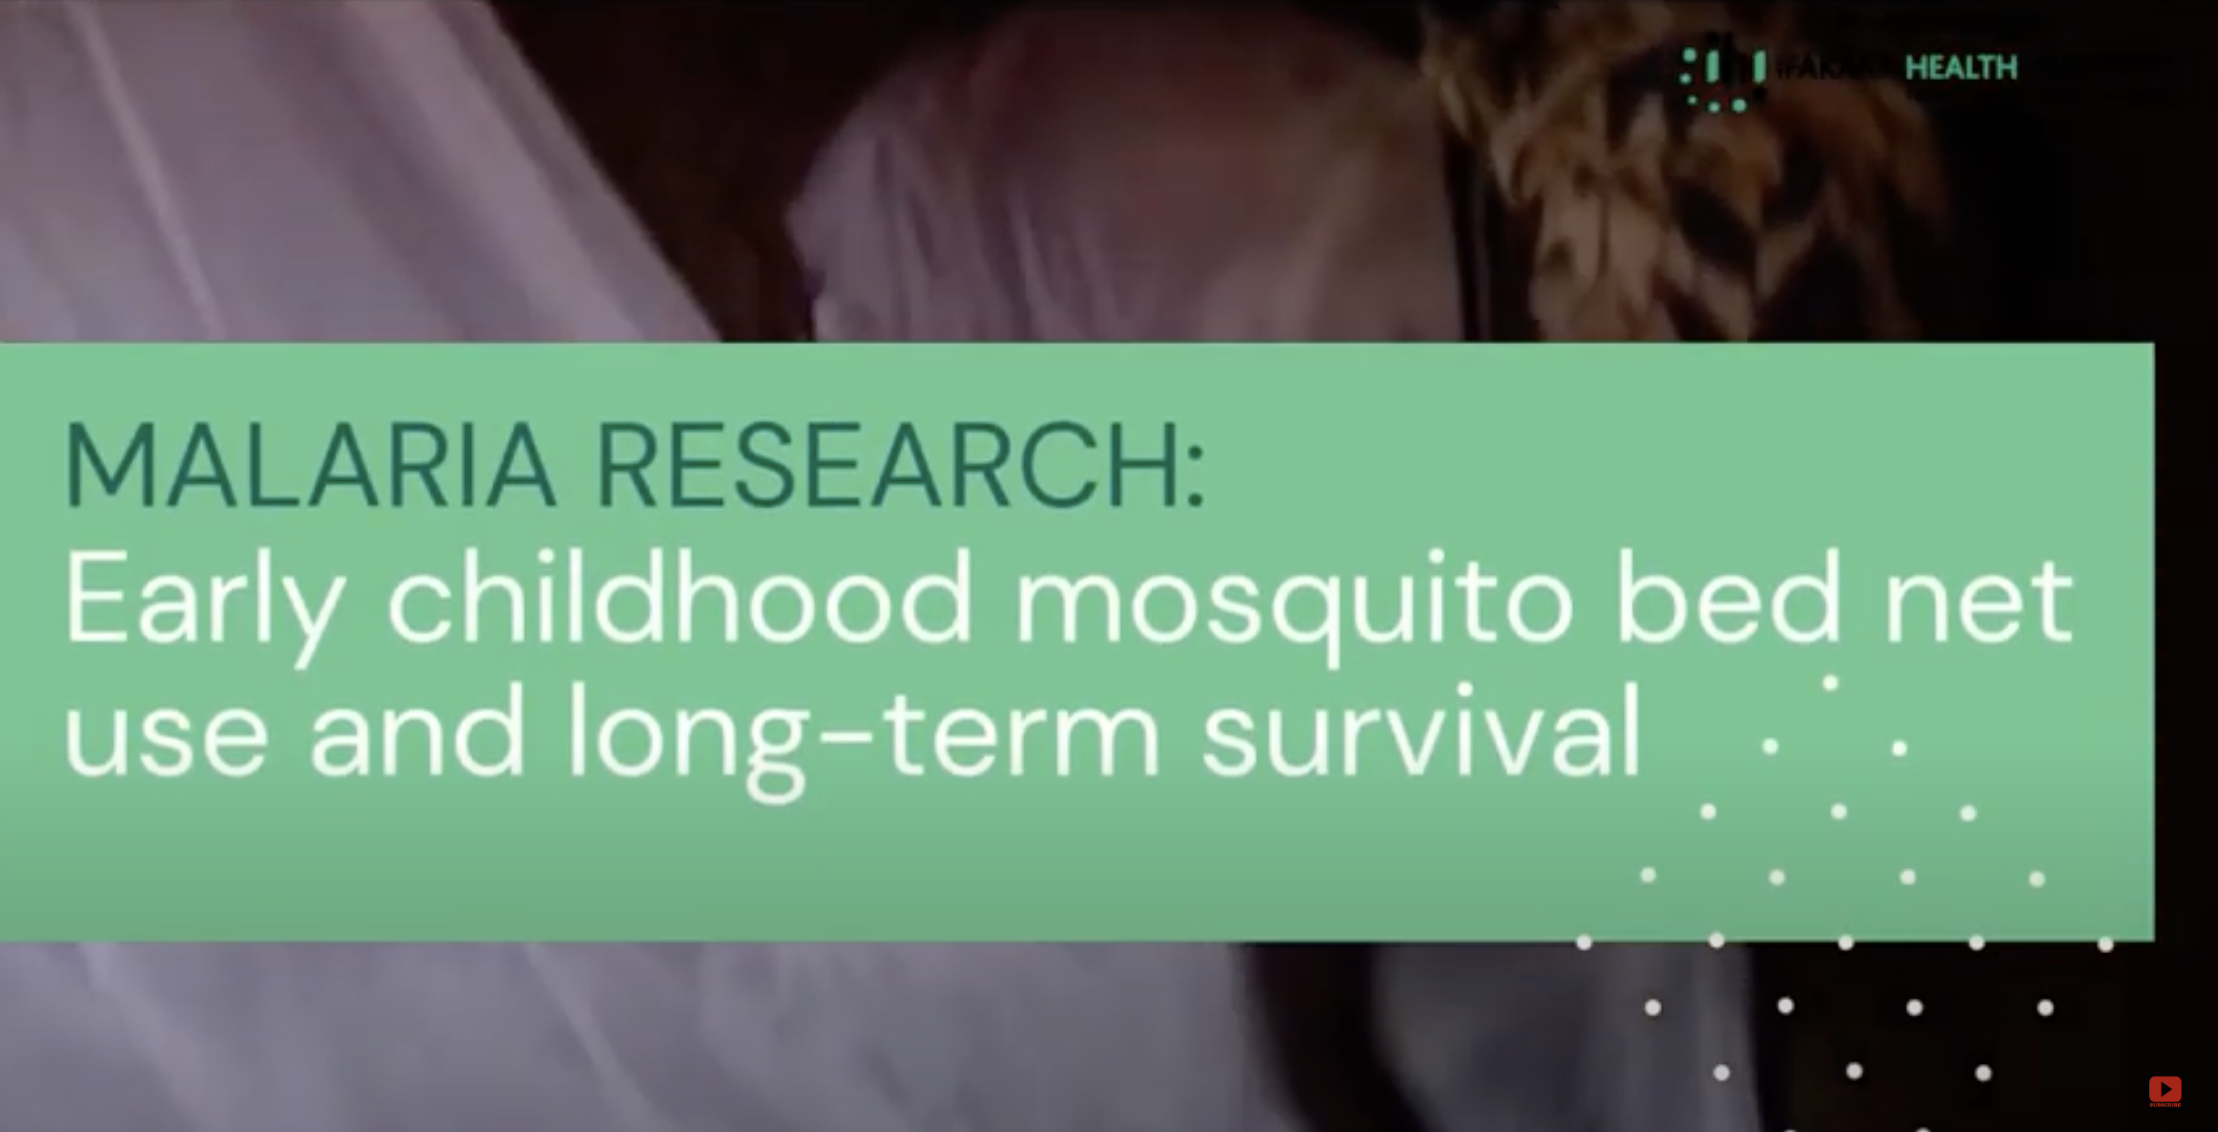 Early childhood mosquito bed net use and long-term survival